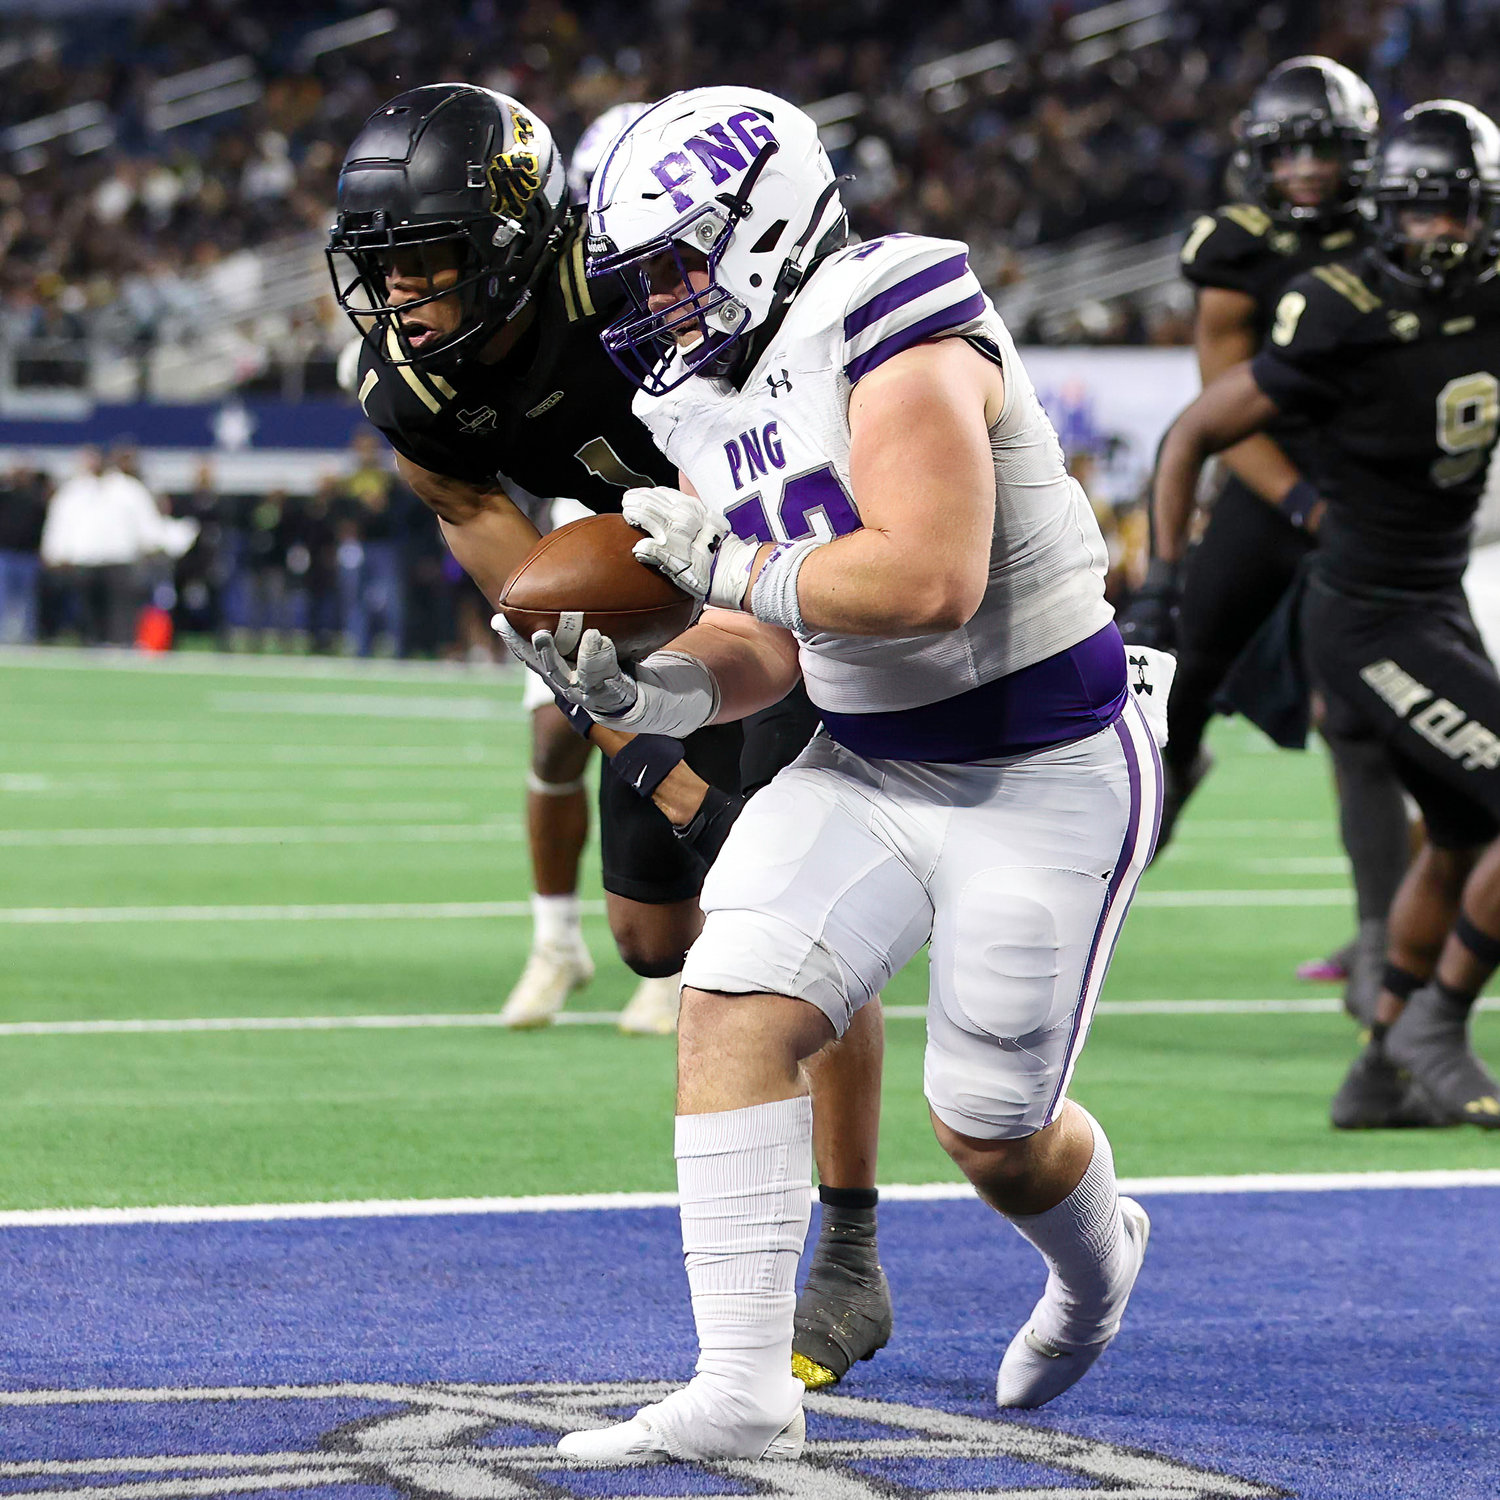 Port Neches-Groves tight end Brock Hebert (32) makes a touchdown catch in the fourth quarter of the Class 5A Division II football state championship game between South Oak Cliff and Port Neches-Groves in Arlington, Texas, on Dec. 16, 2022.